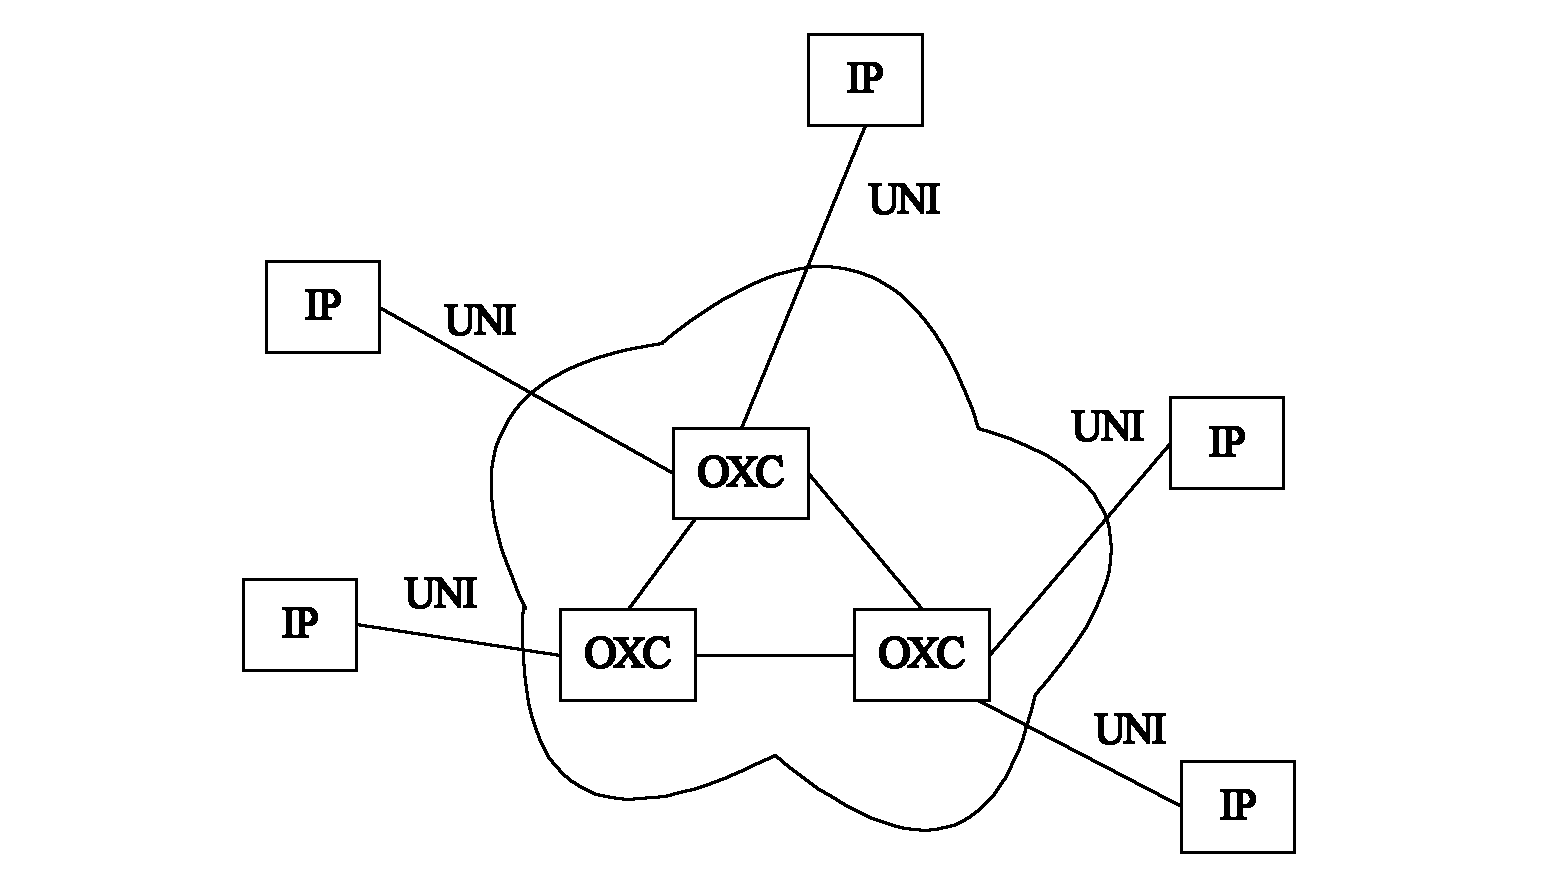 Multicast-sharing and multilayer protection method based on subtrees in WDM (wavelength division multiplexer) optical network,